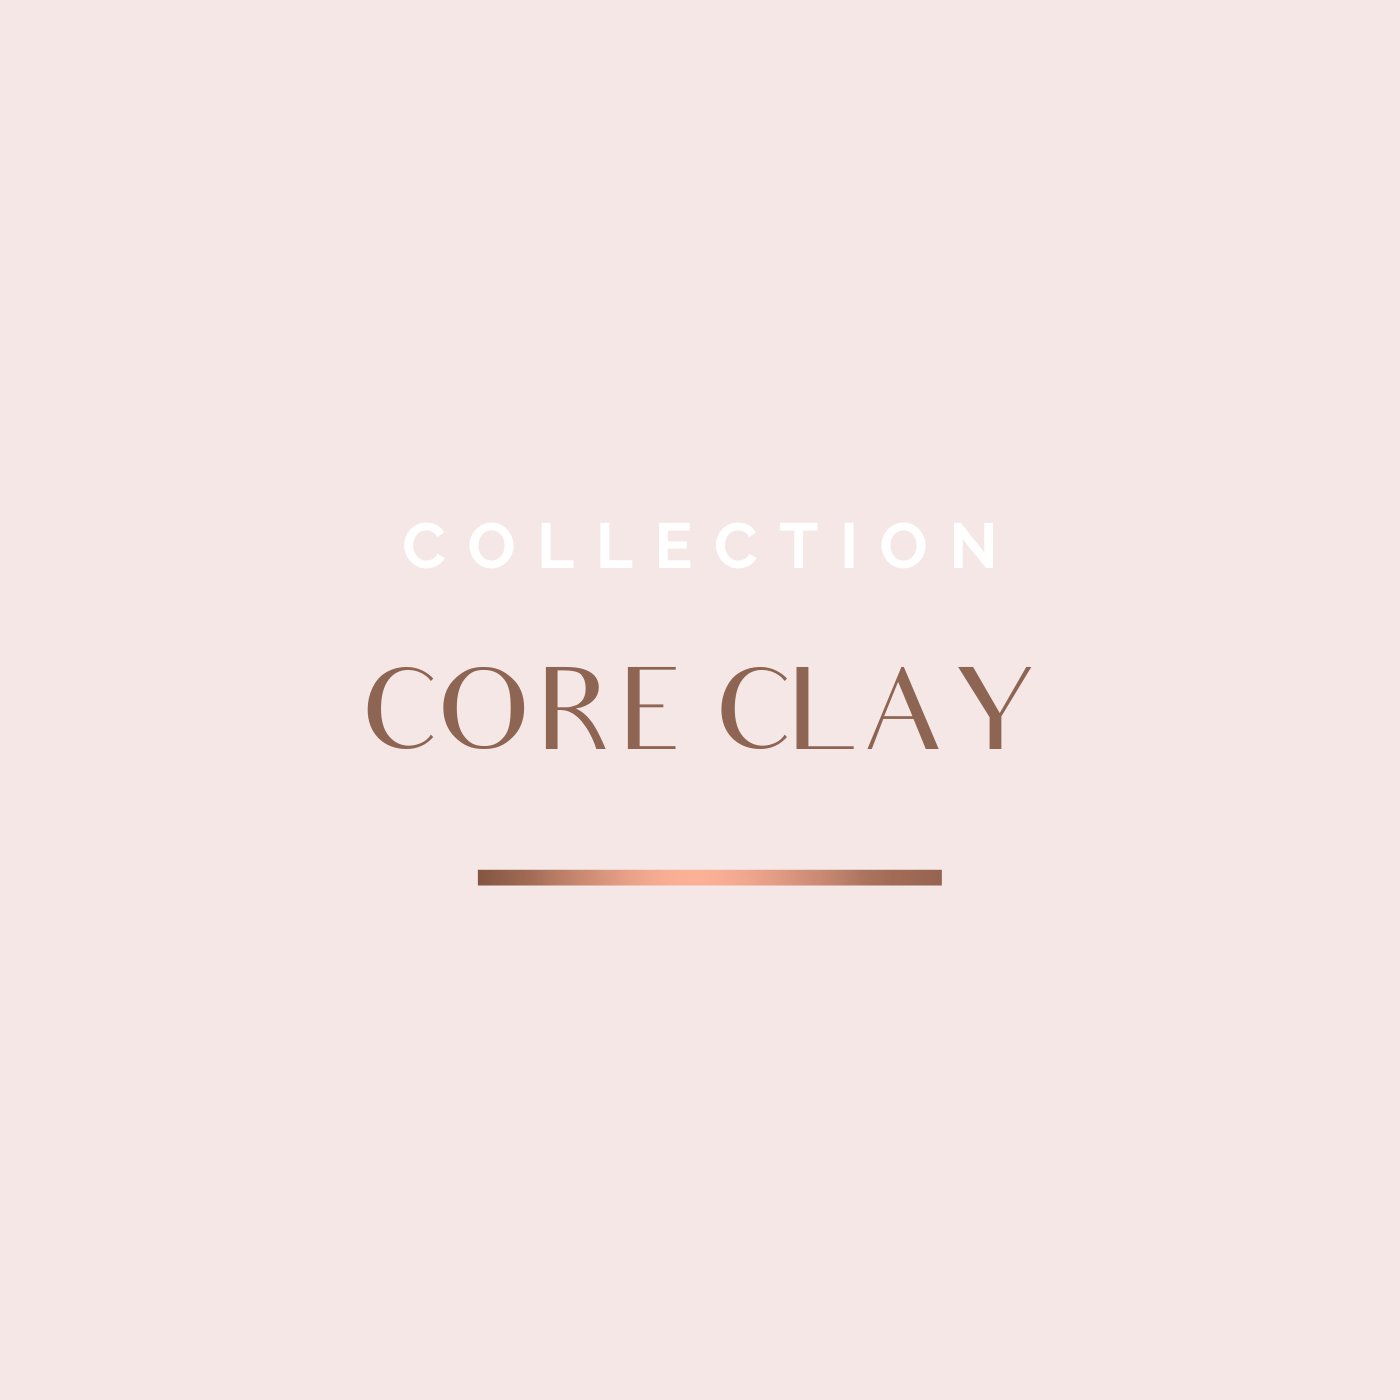 CORE CLAY COLLECTION